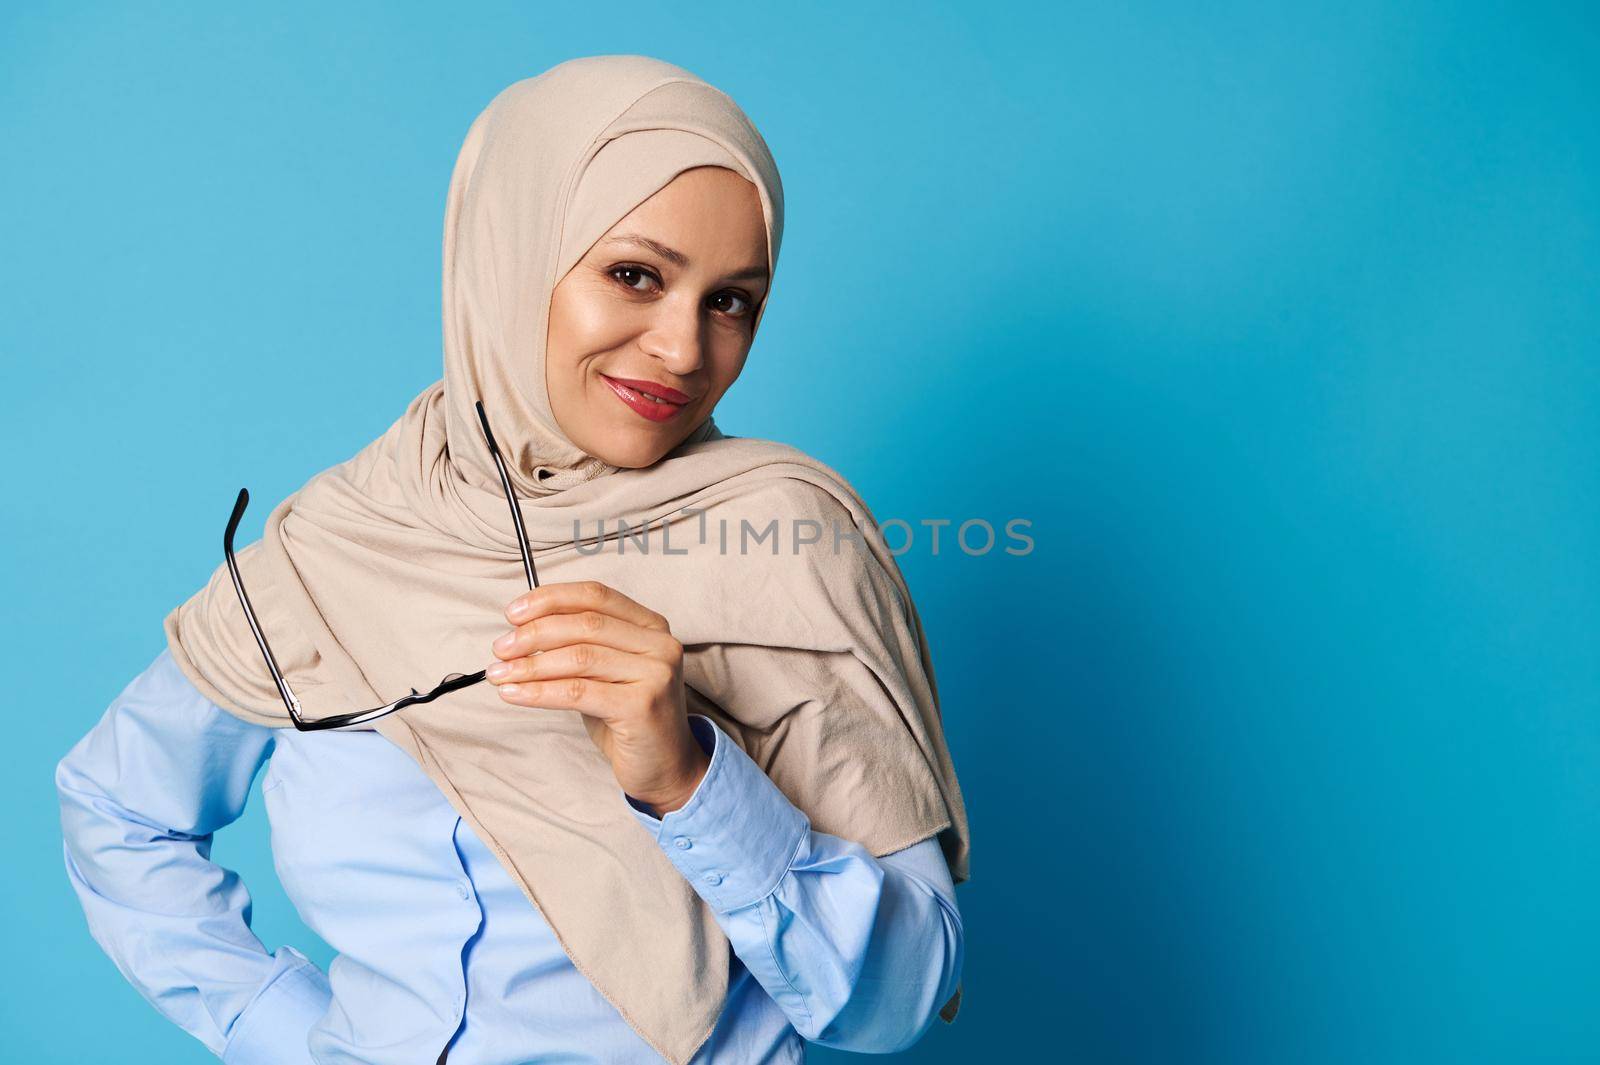 Confident portrait of an attractive Arab woman with covered head in hijab and wearing casual clothes on blue background with copy space